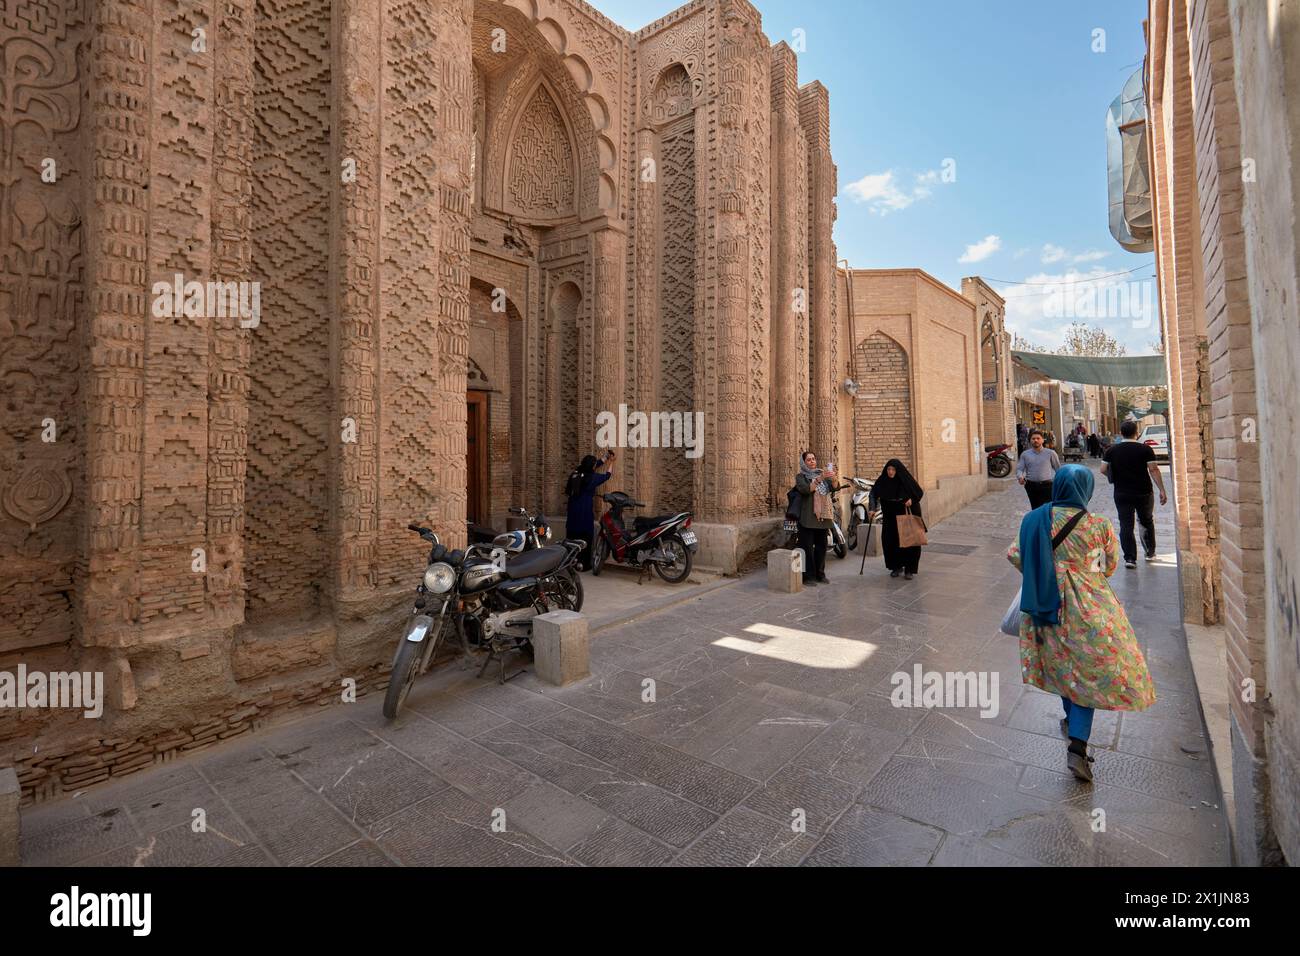 People walk in a narrow street at the Jorjir Gate, the only remaining part of the 10th century Jorjir Mosque in Isfahan, Iran. Stock Photo